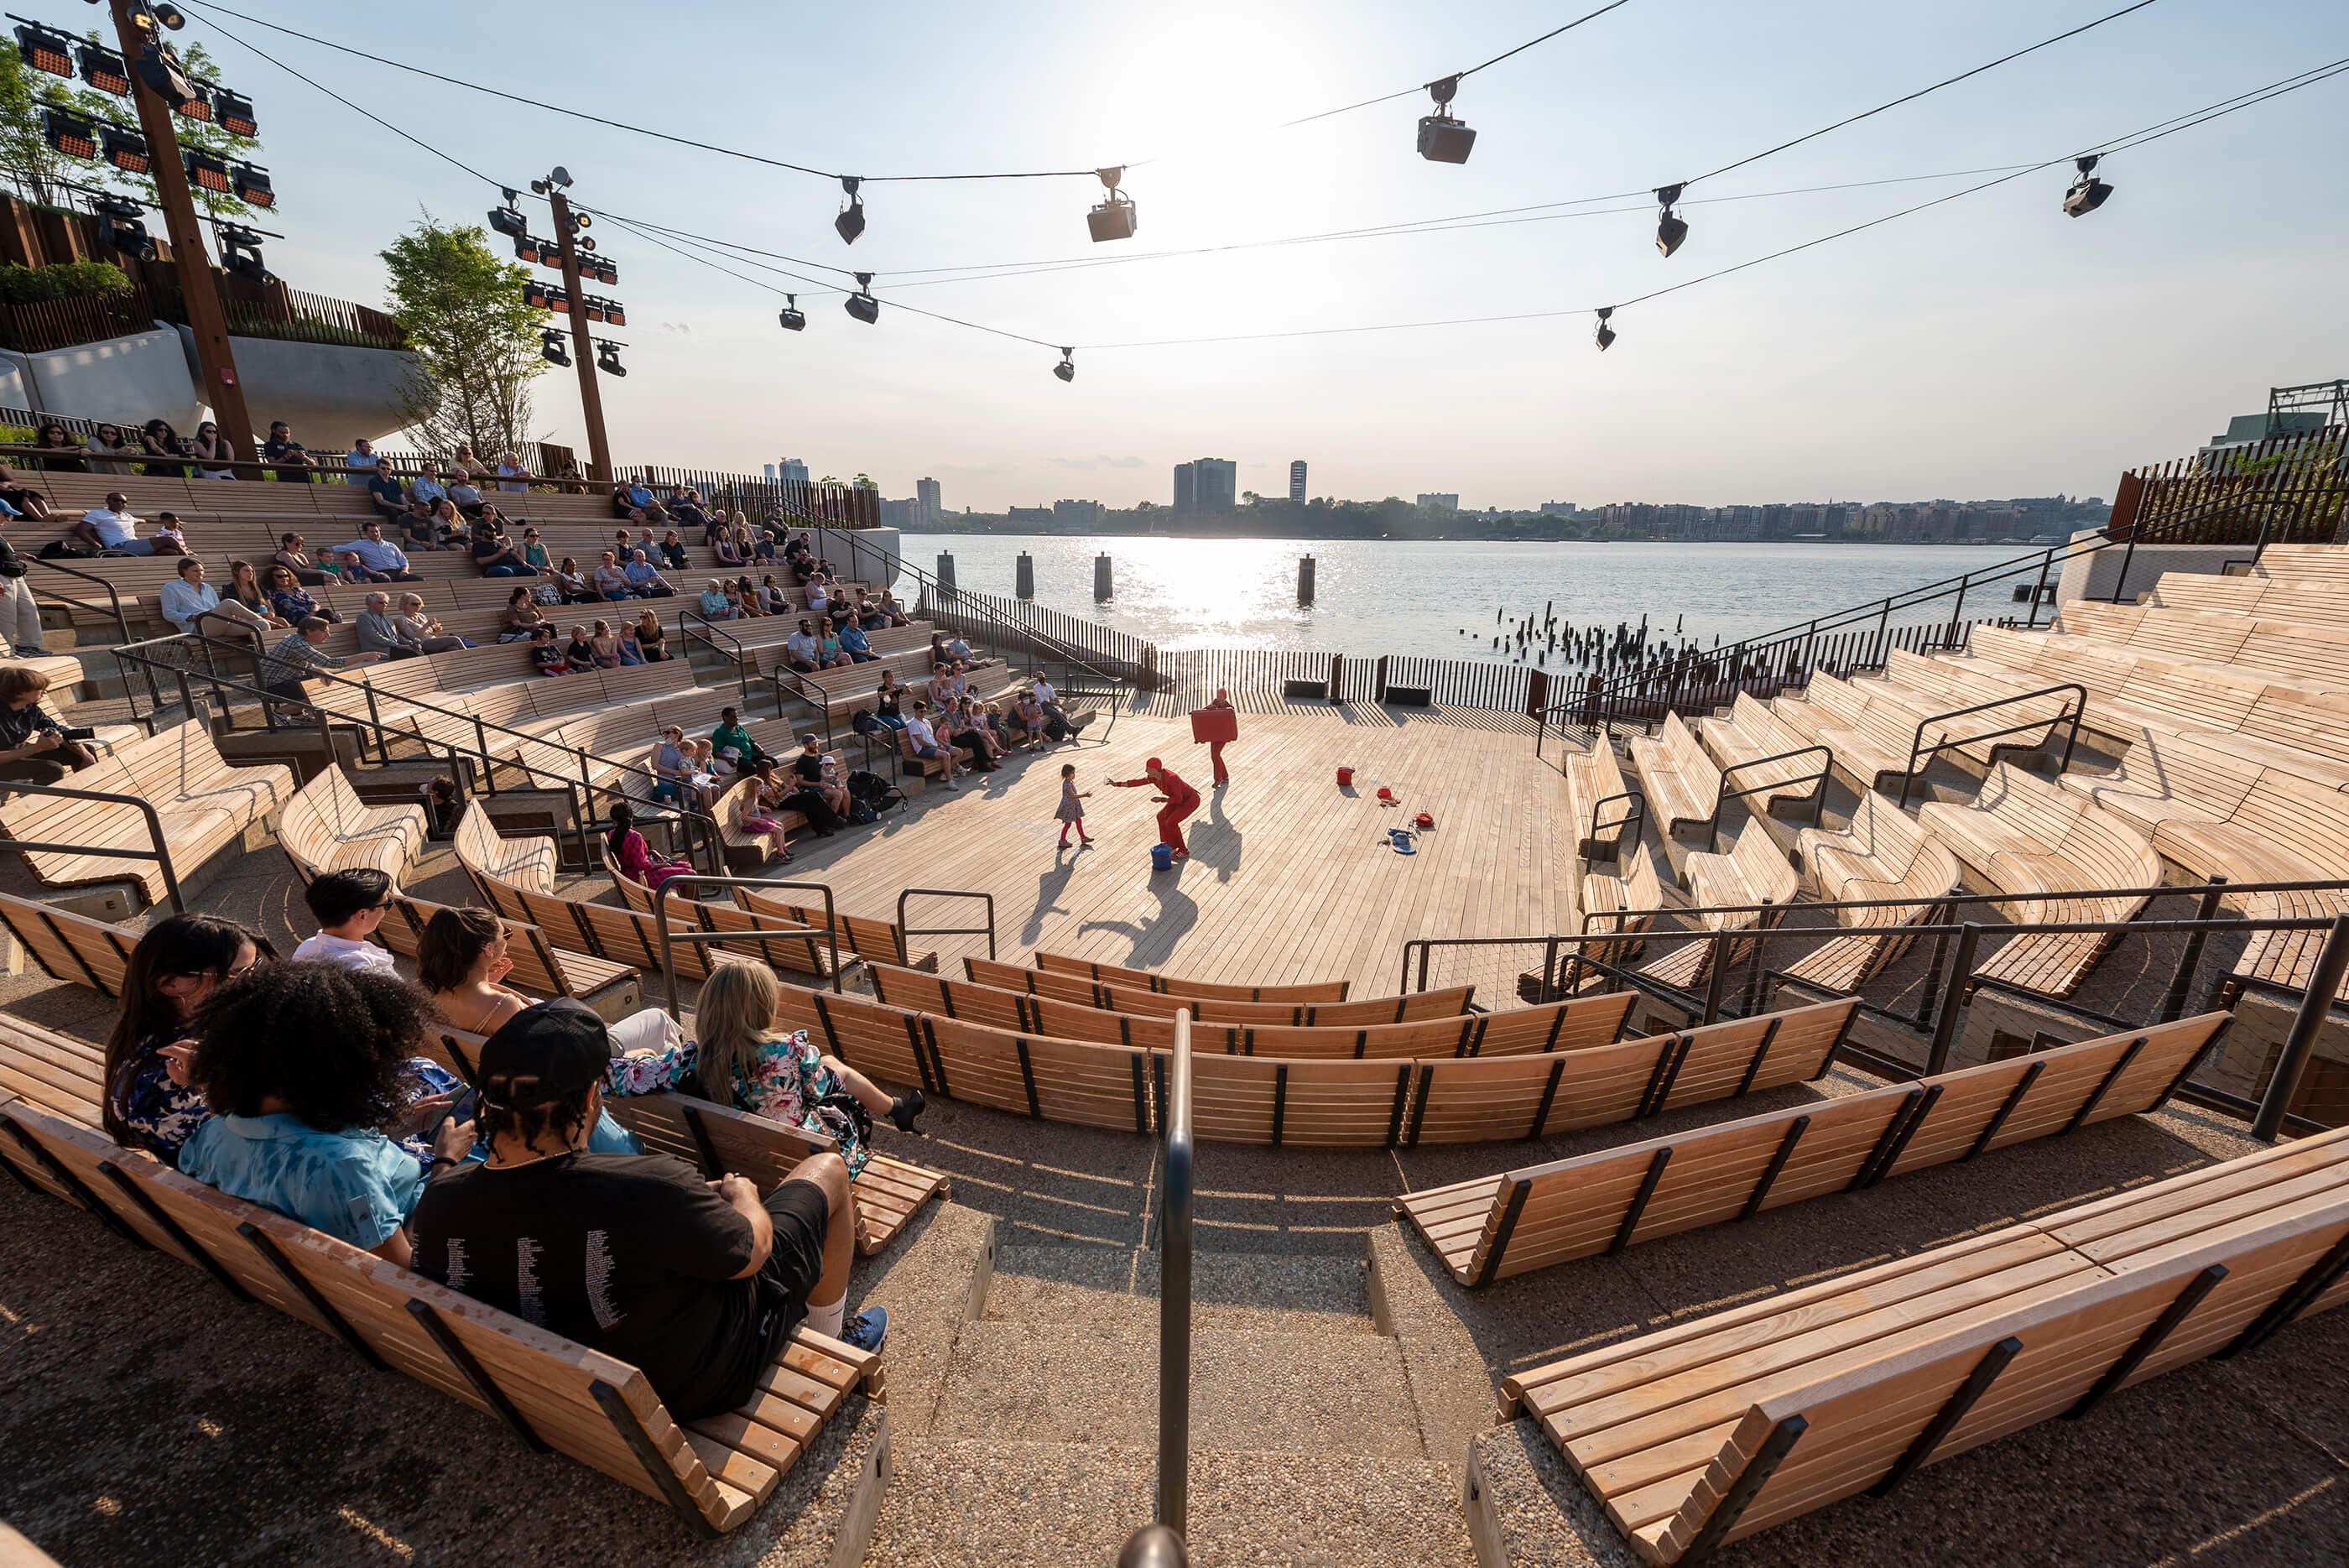 The Little Island amphitheater, made of wood decking